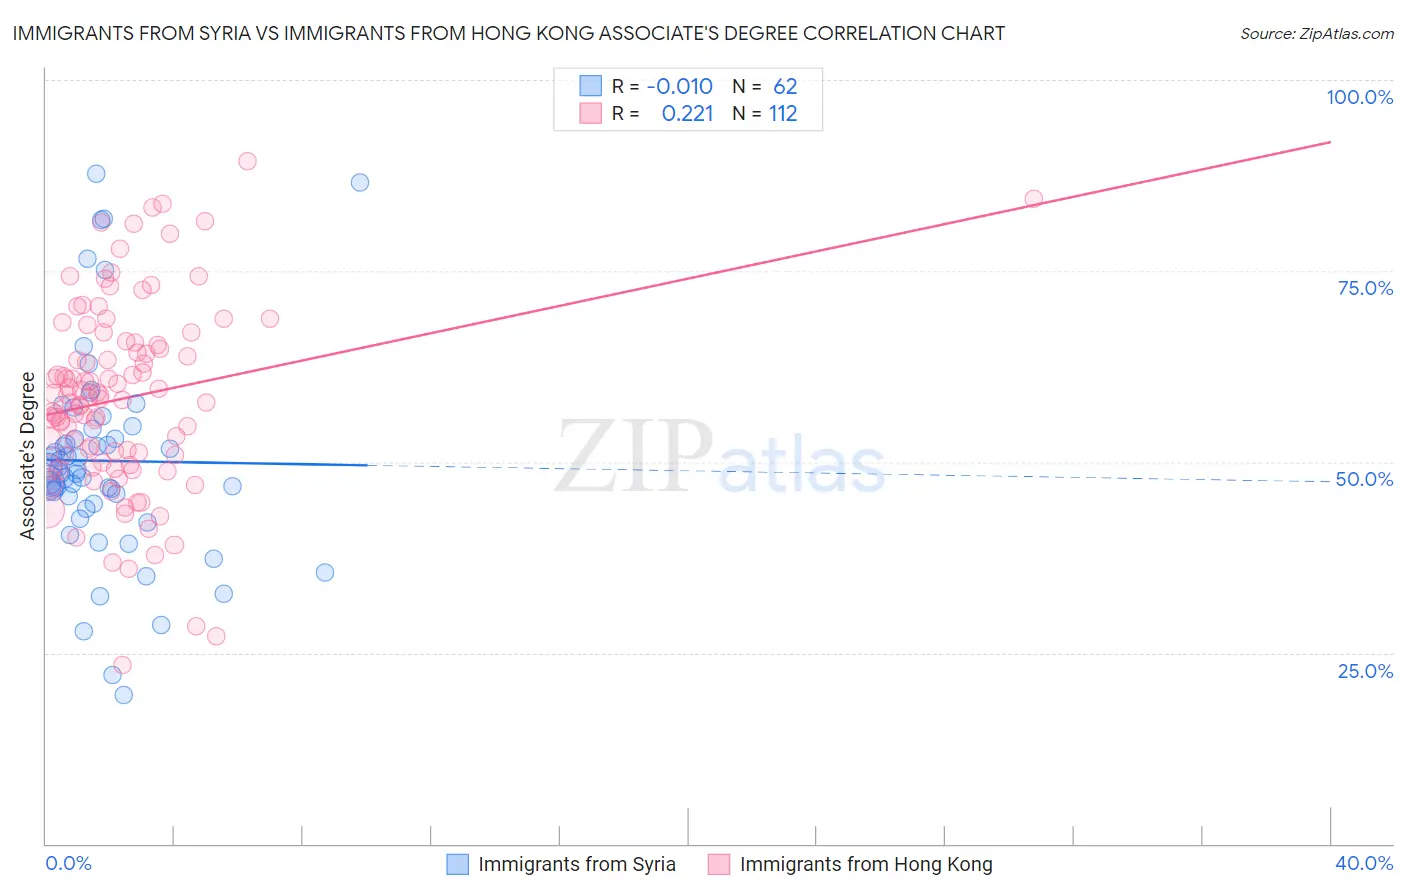 Immigrants from Syria vs Immigrants from Hong Kong Associate's Degree